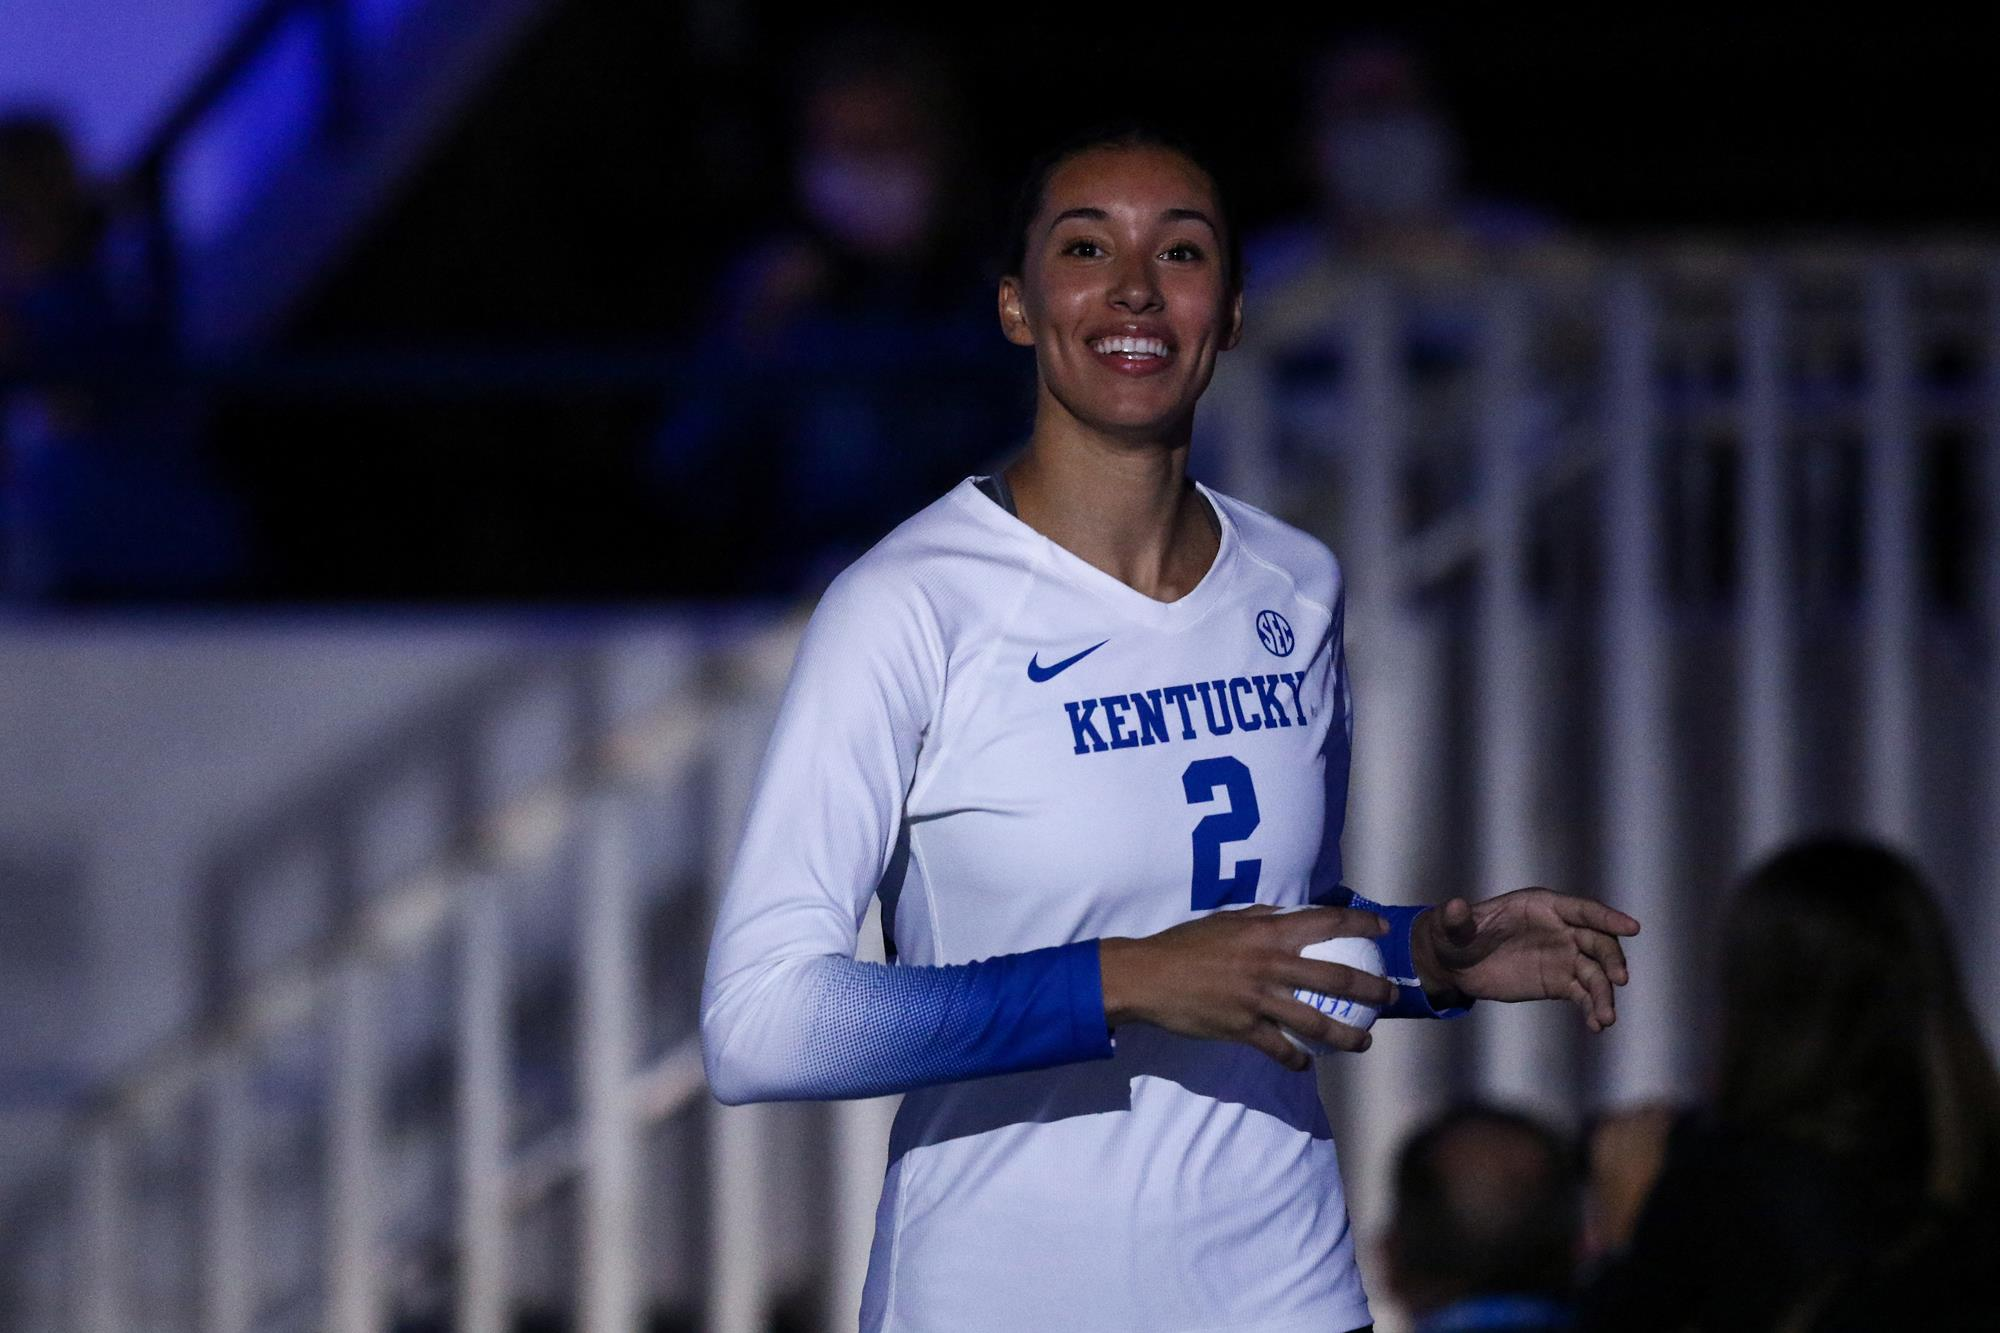 No. 5 Kentucky Plays Mississippi State at 6 p.m. ET on Wednesday